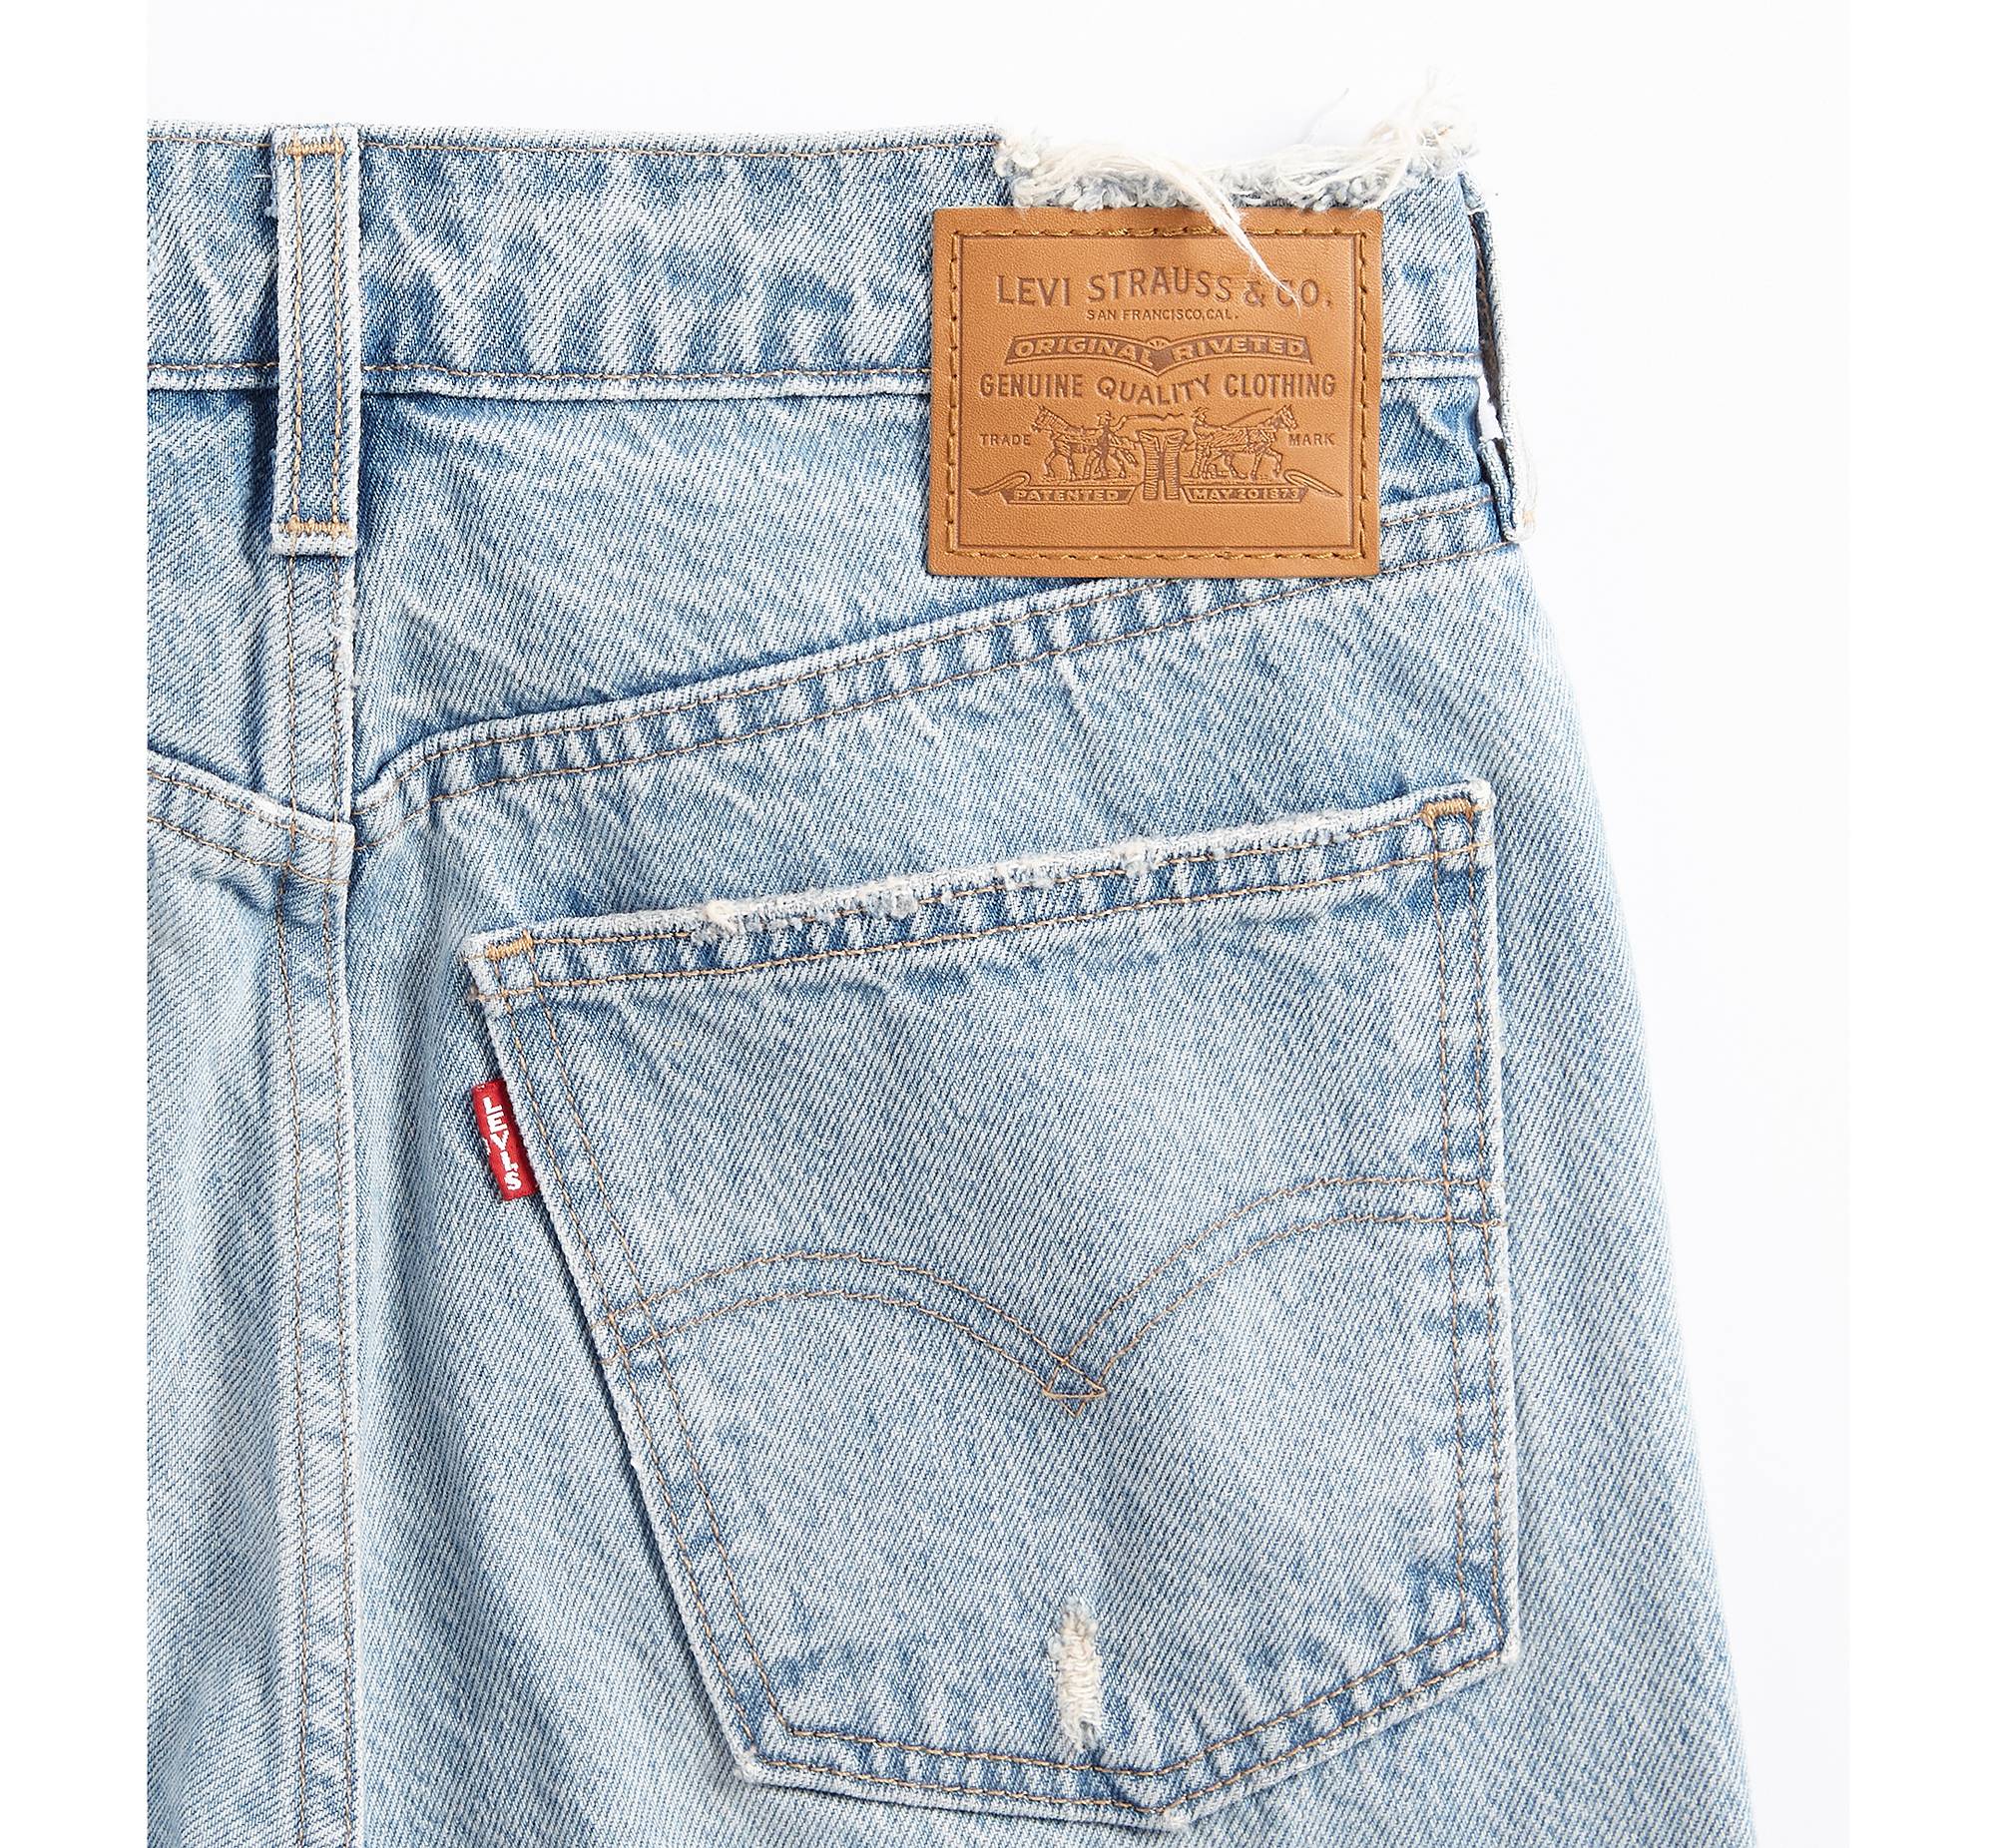 Middy Straight Jeans 8